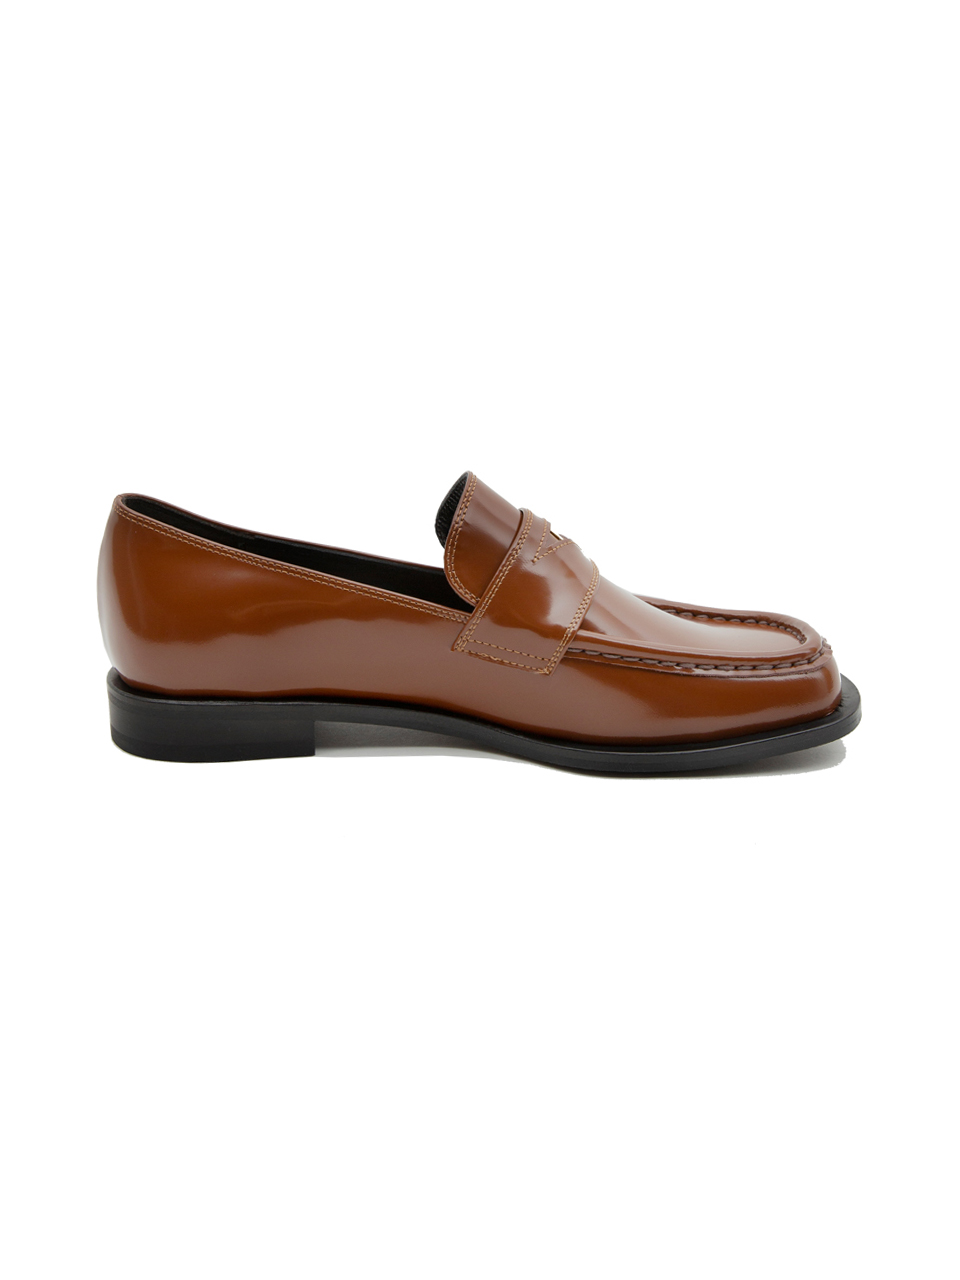 PENNY LOAFER-brown